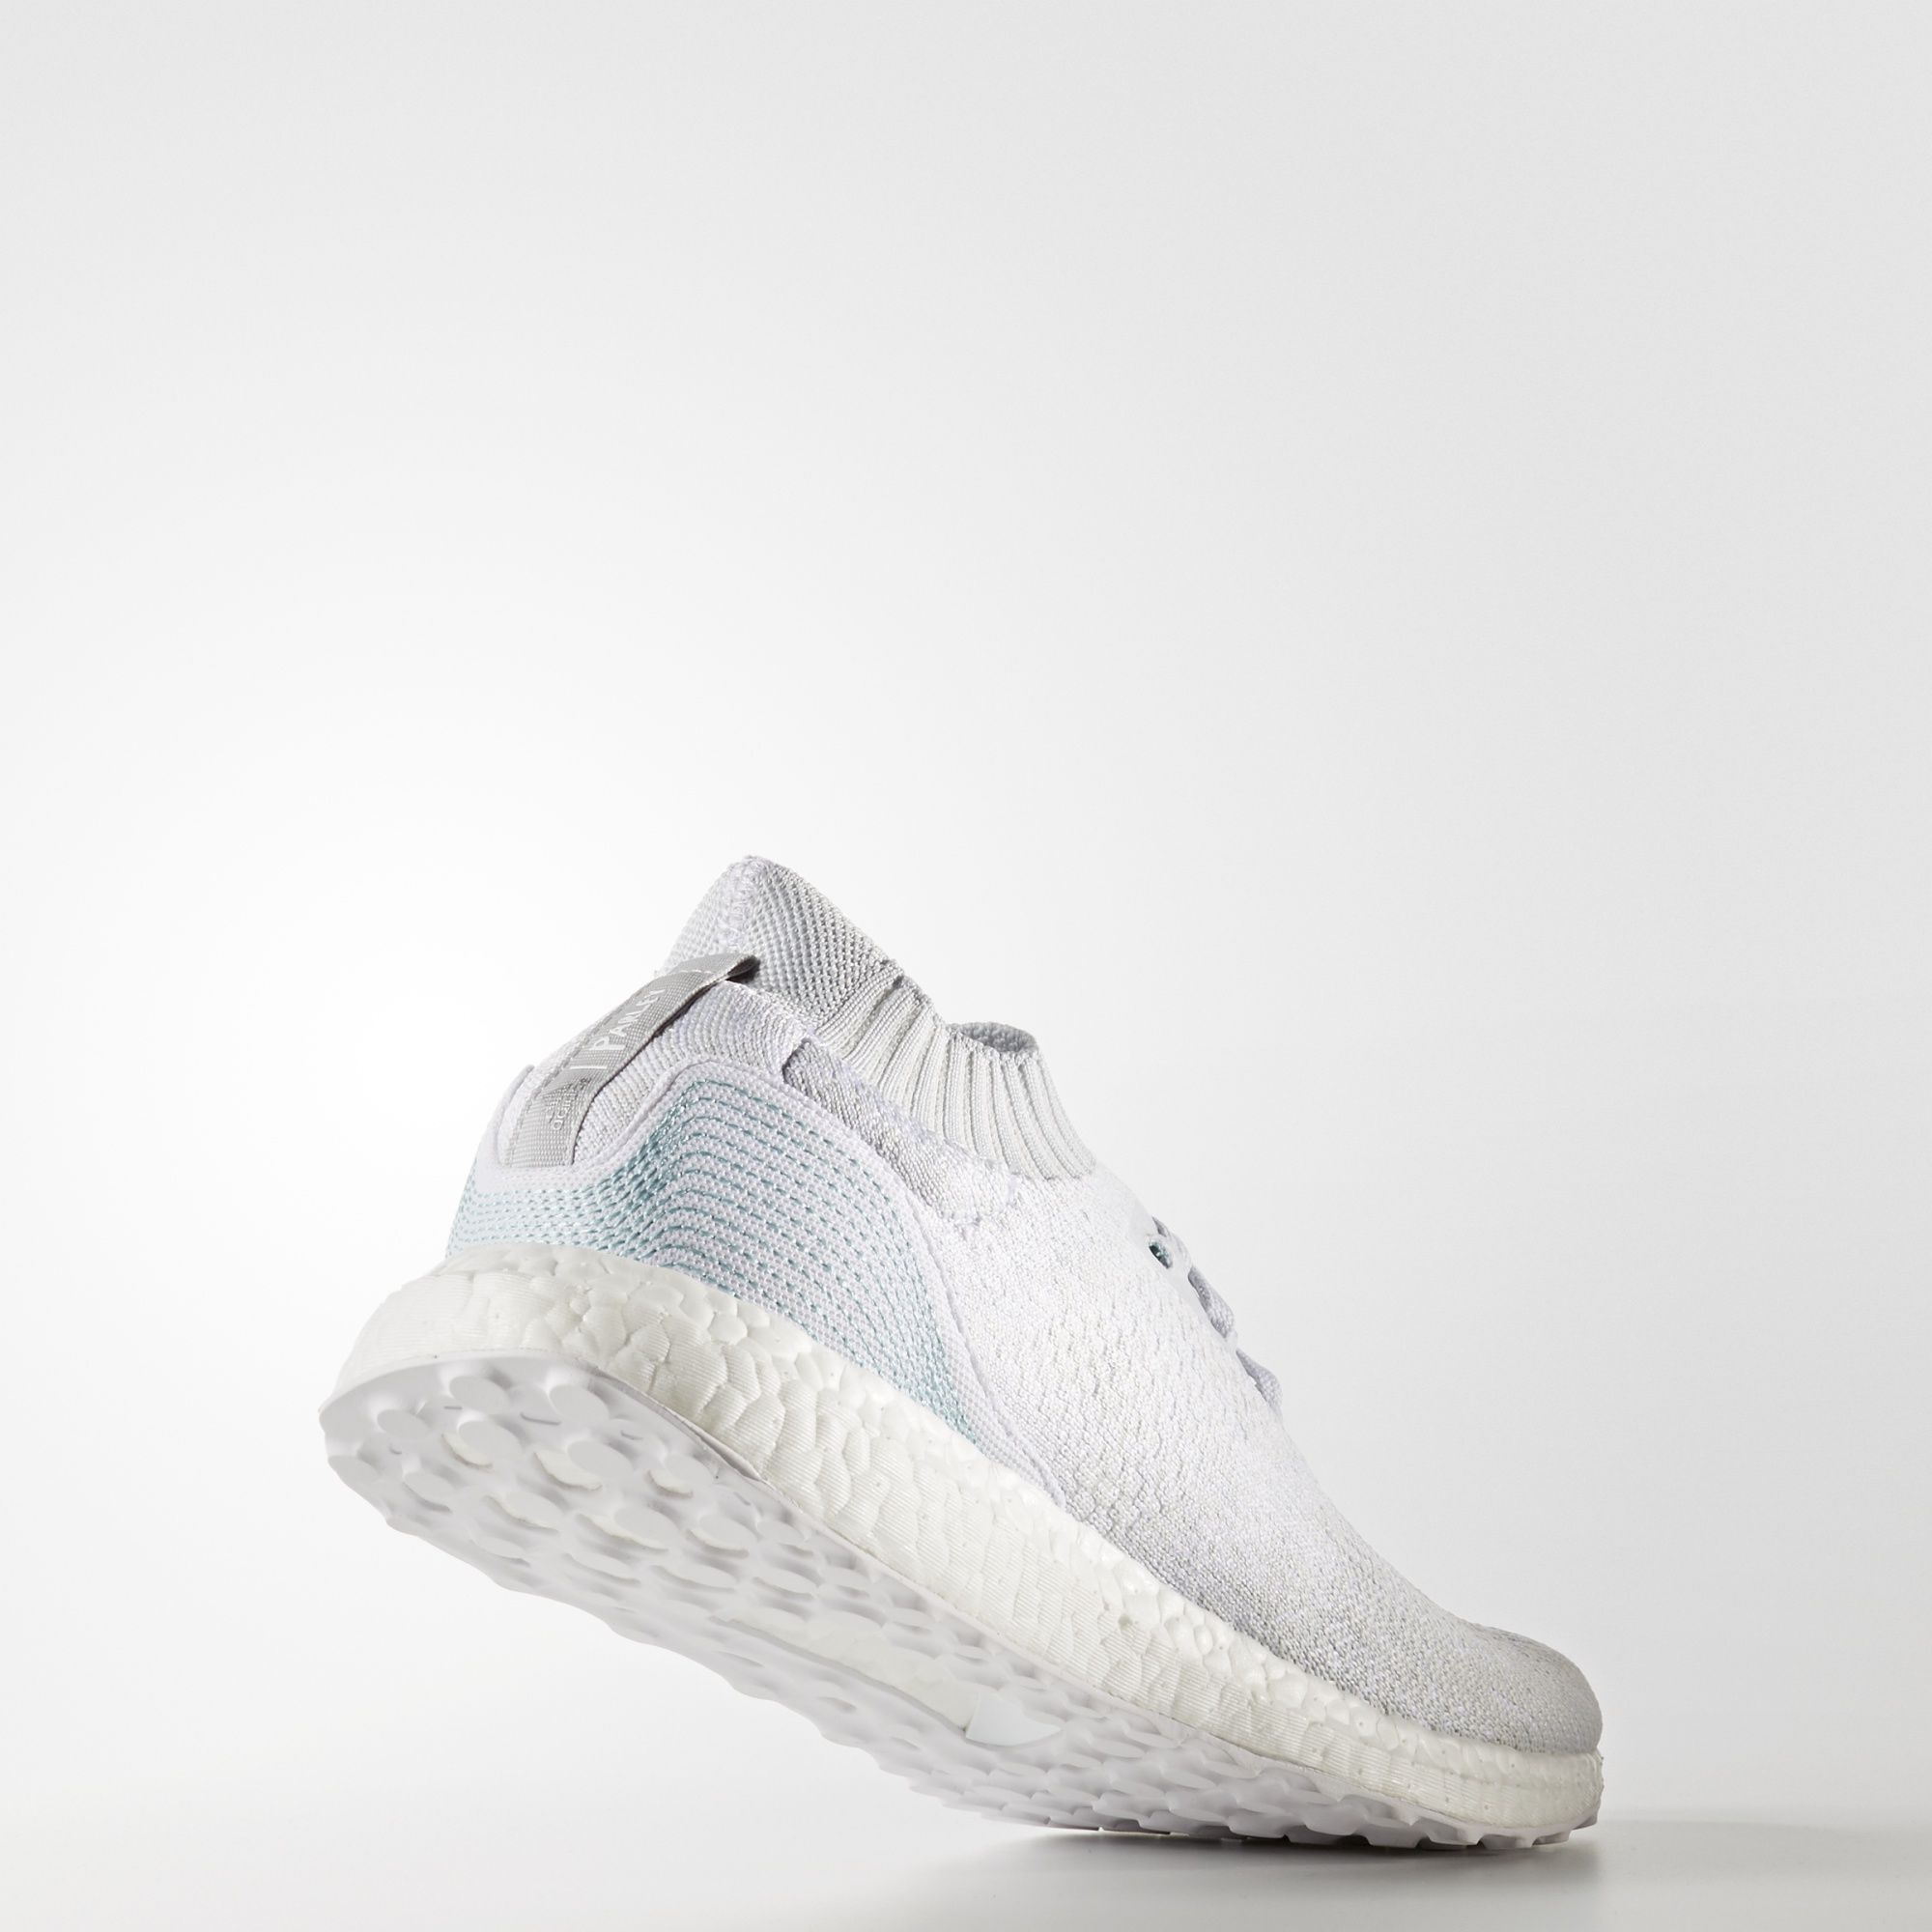 Adidas Ultra Boost Uncaged 
« Parley »